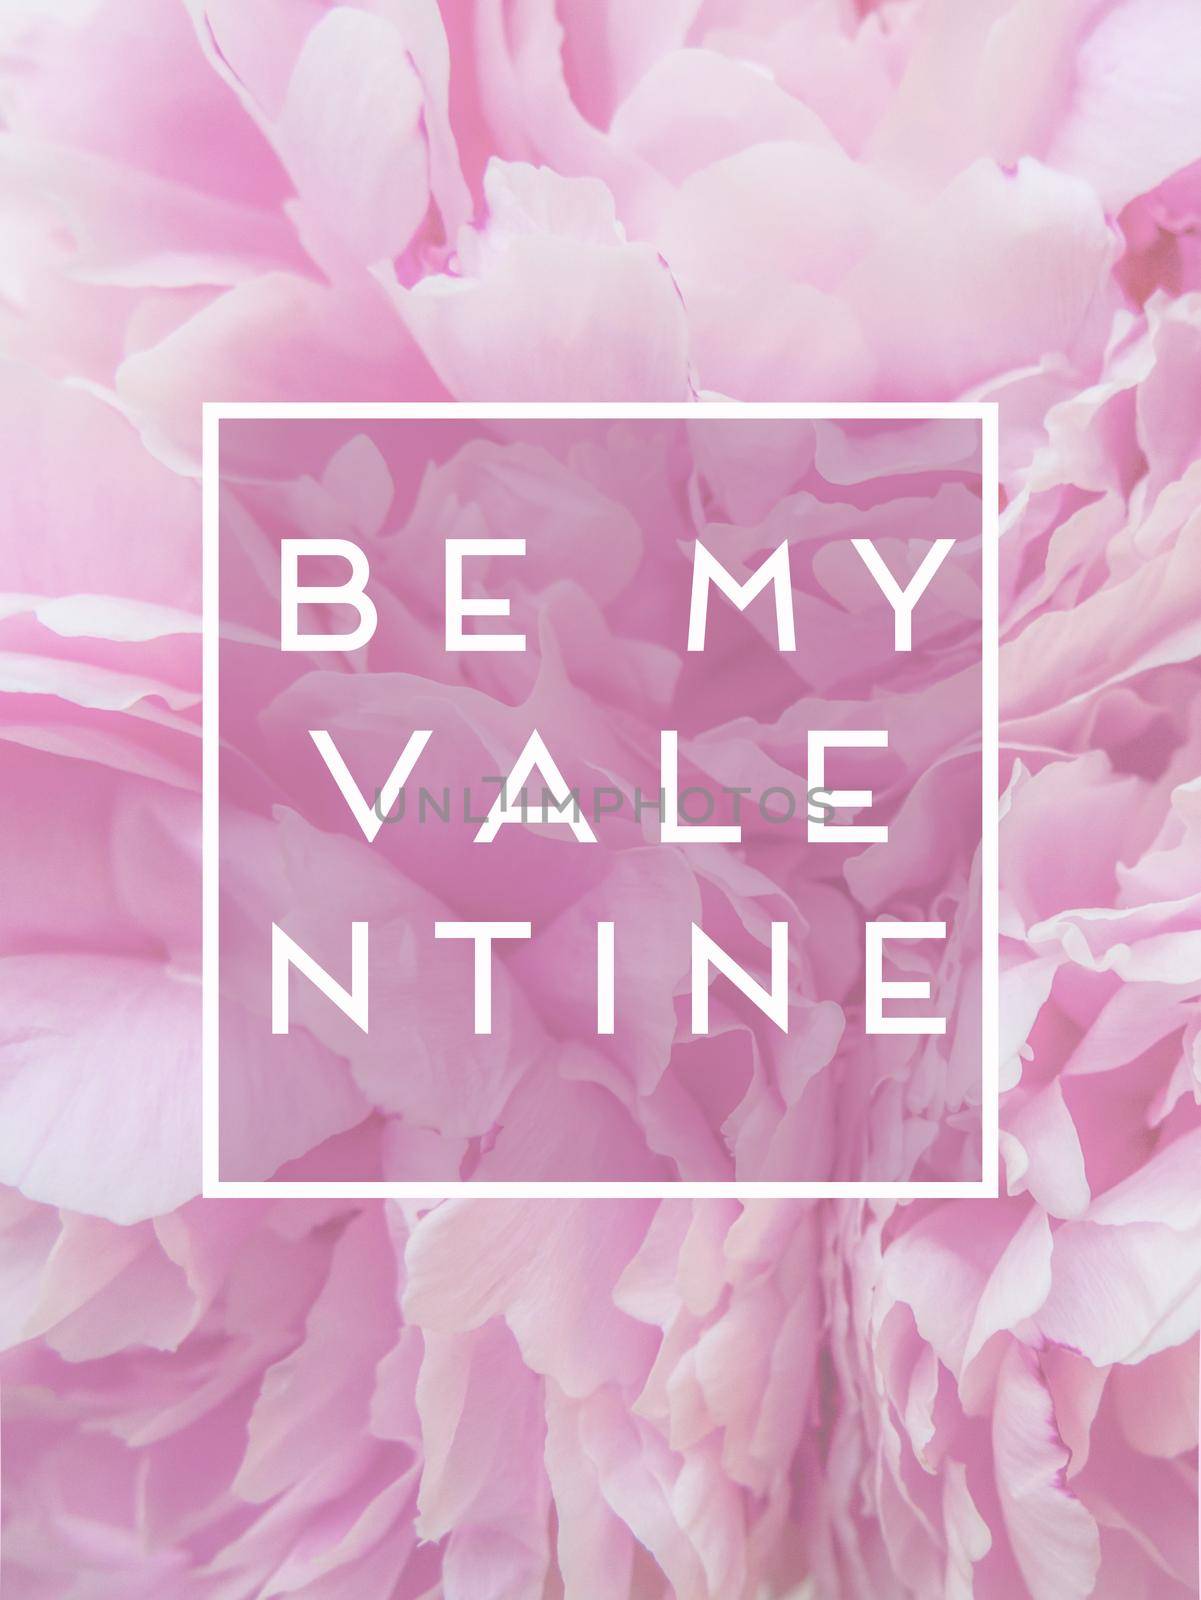 text be my valentine in the frame against the background of pink peonies flowers. postcard.